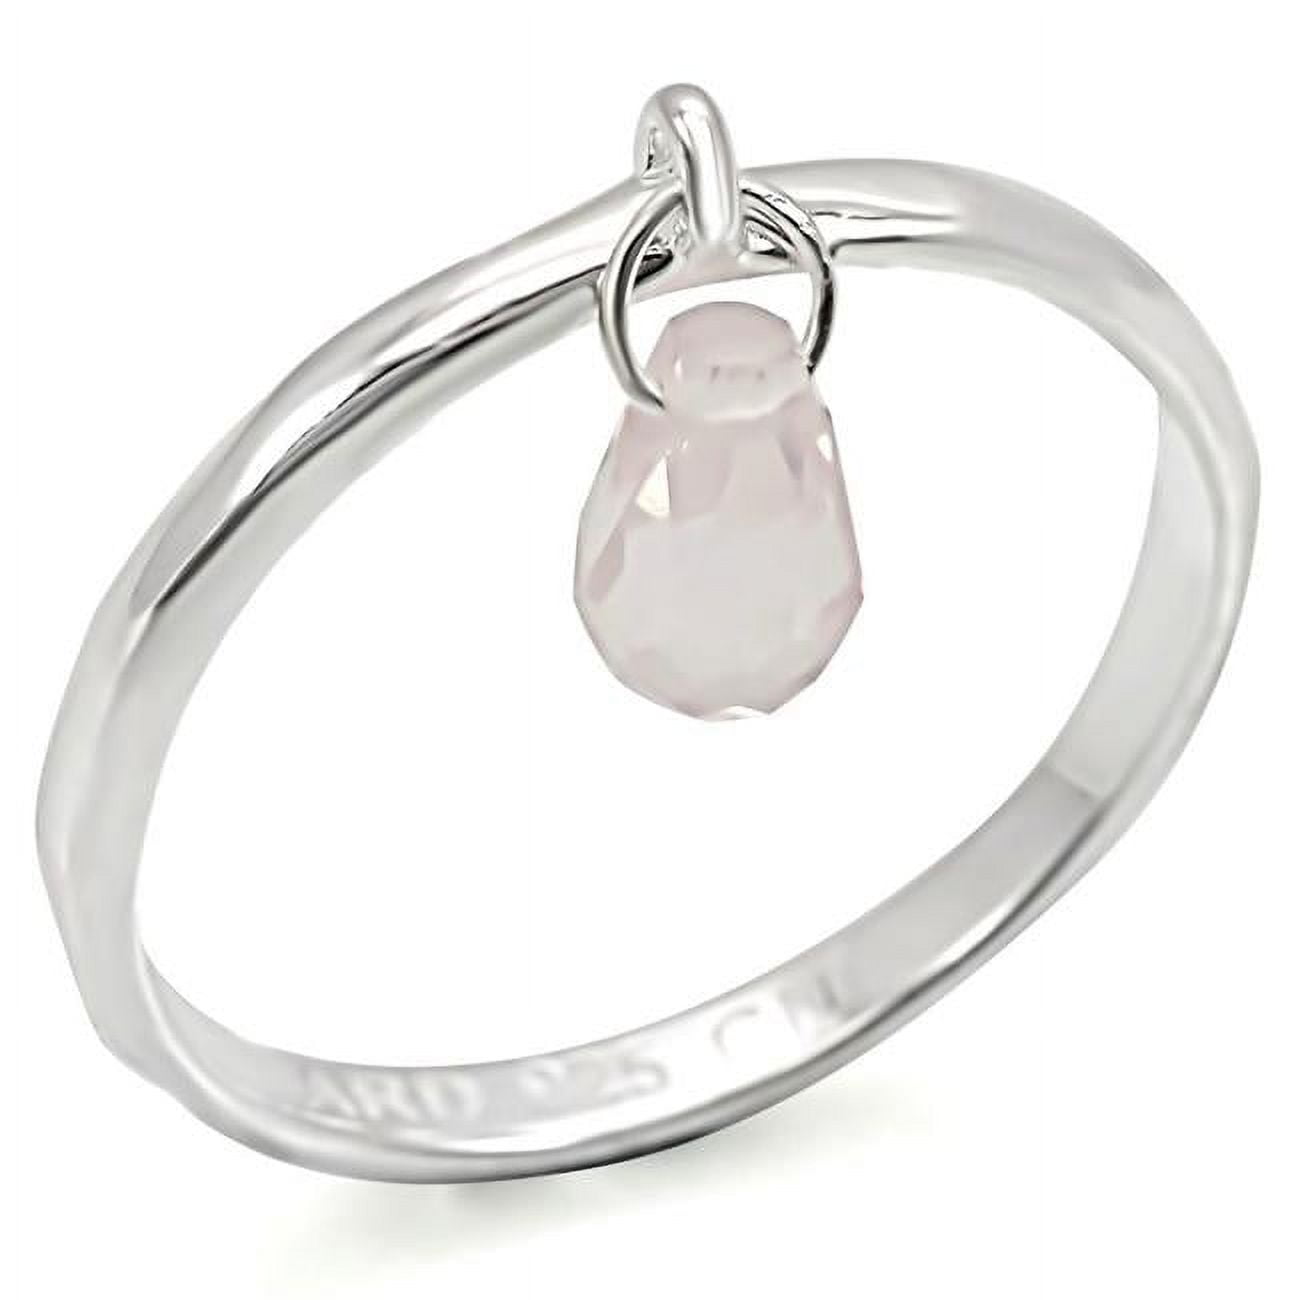 Picture of Alamode LOS323-6 Women Silver 925 Sterling Silver Ring with Genuine Stone in Light Rose - Size 6